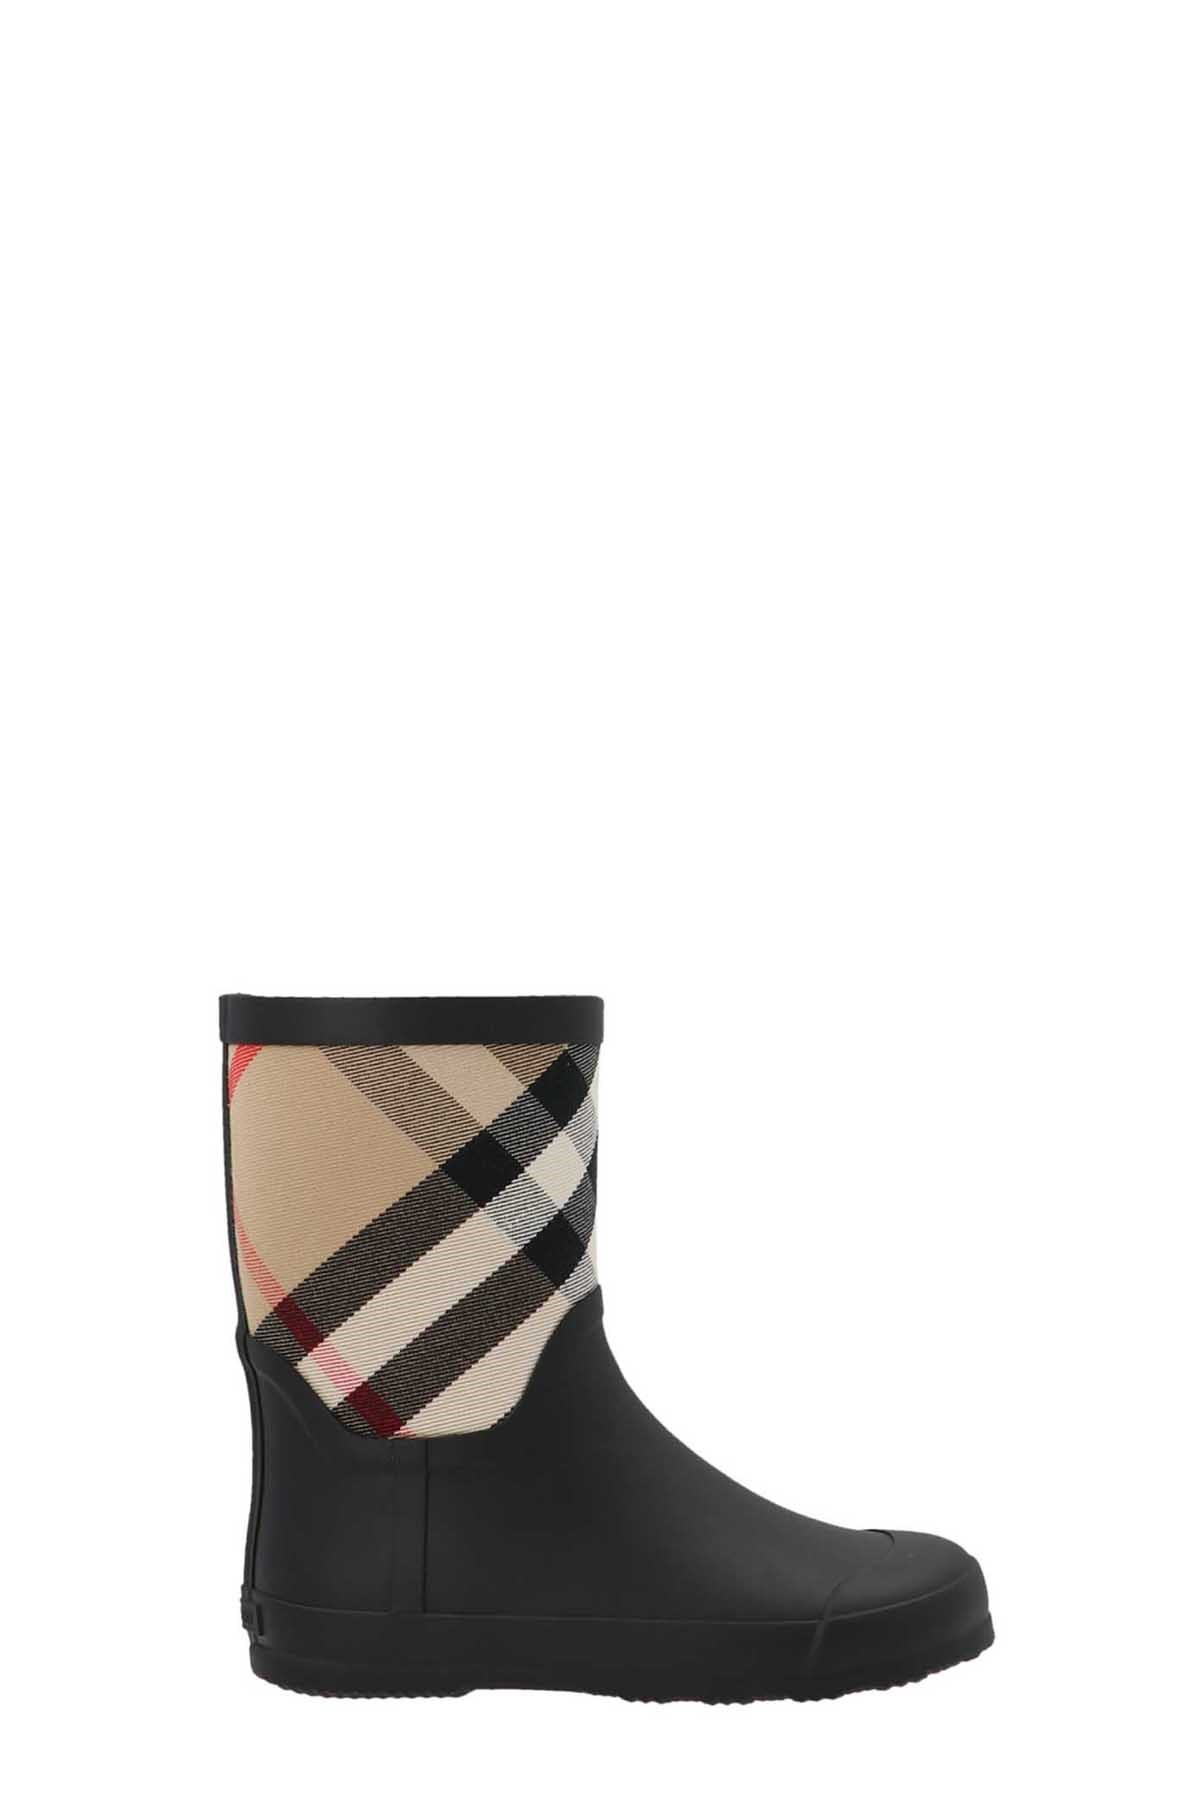 BURBERRY 'Ranmoor’ Ankle Boots